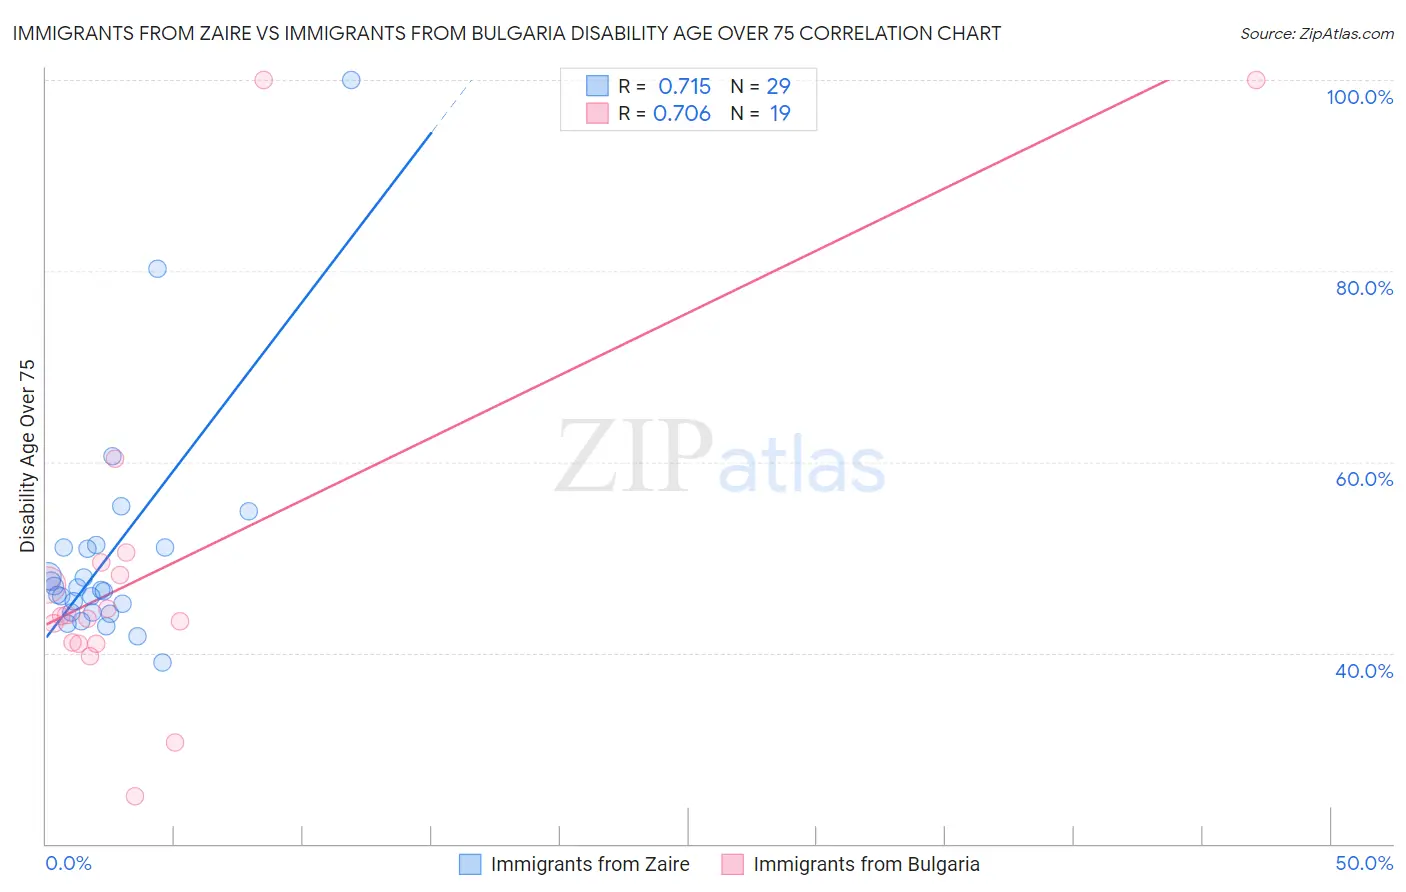 Immigrants from Zaire vs Immigrants from Bulgaria Disability Age Over 75